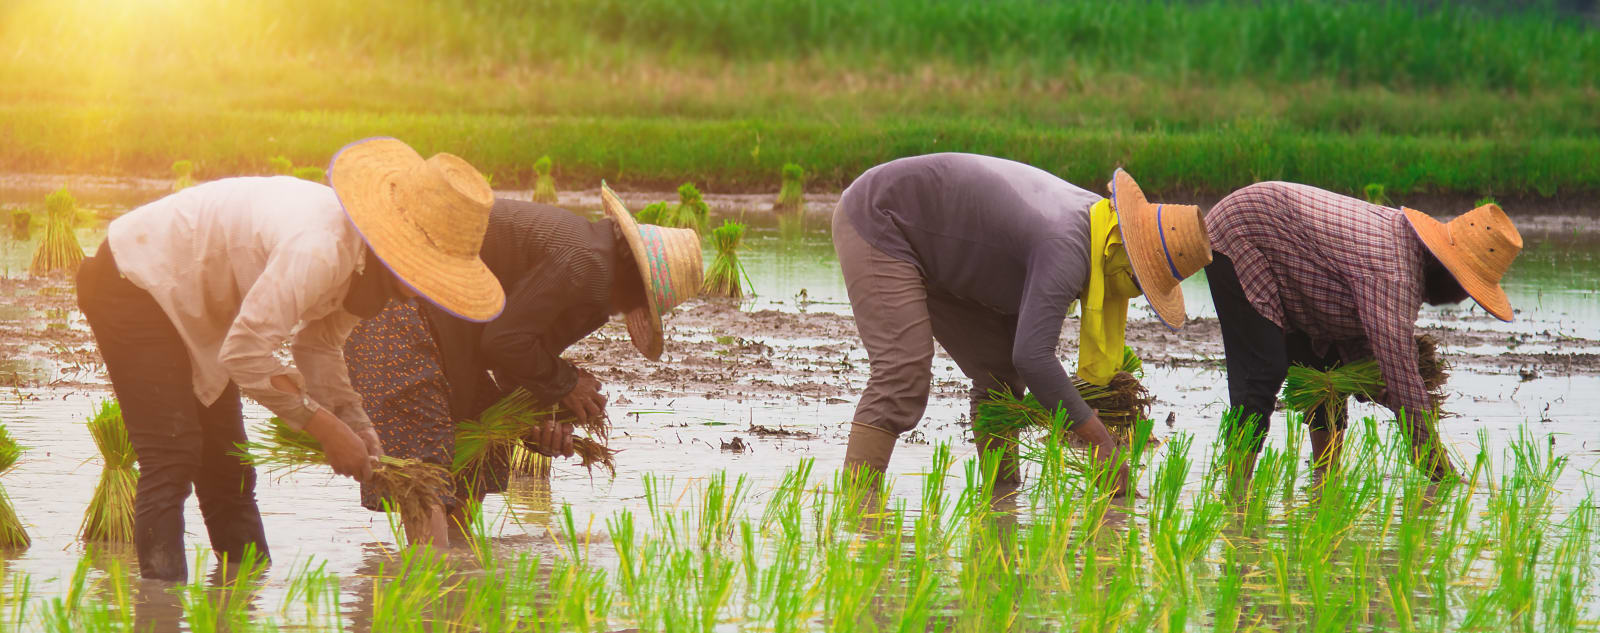 Four rice farmers wearing straw hats are bent over, water up to their mid-calf, in a rice field harvesting rice.